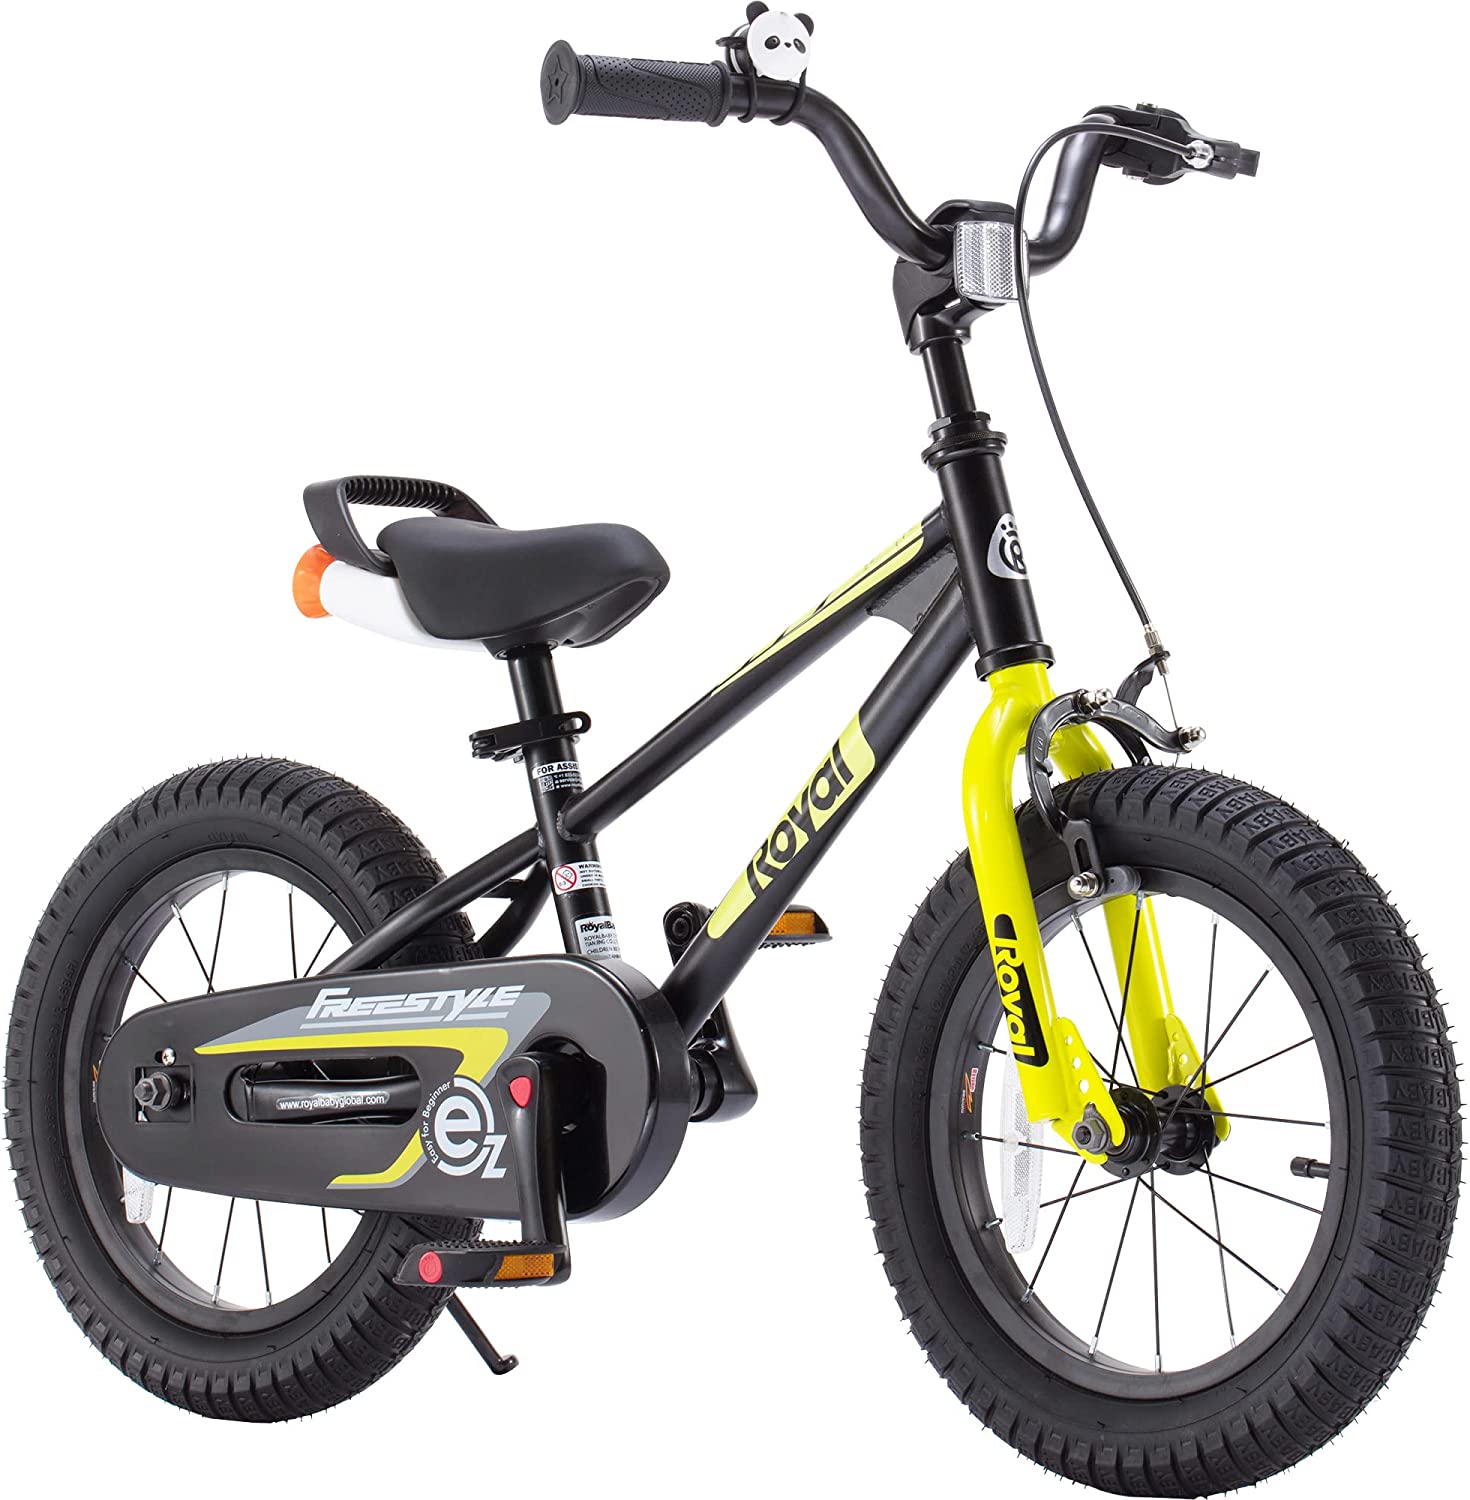 RoyalBaby EZ Kids Bike, Innovation 2-in-1 Balance to Pedal Beginners Learning Bicycle Boys Girls Ages 3-9 Years, 12 14 16 18 Inch Multiple Colors, No Training Wheel Needed